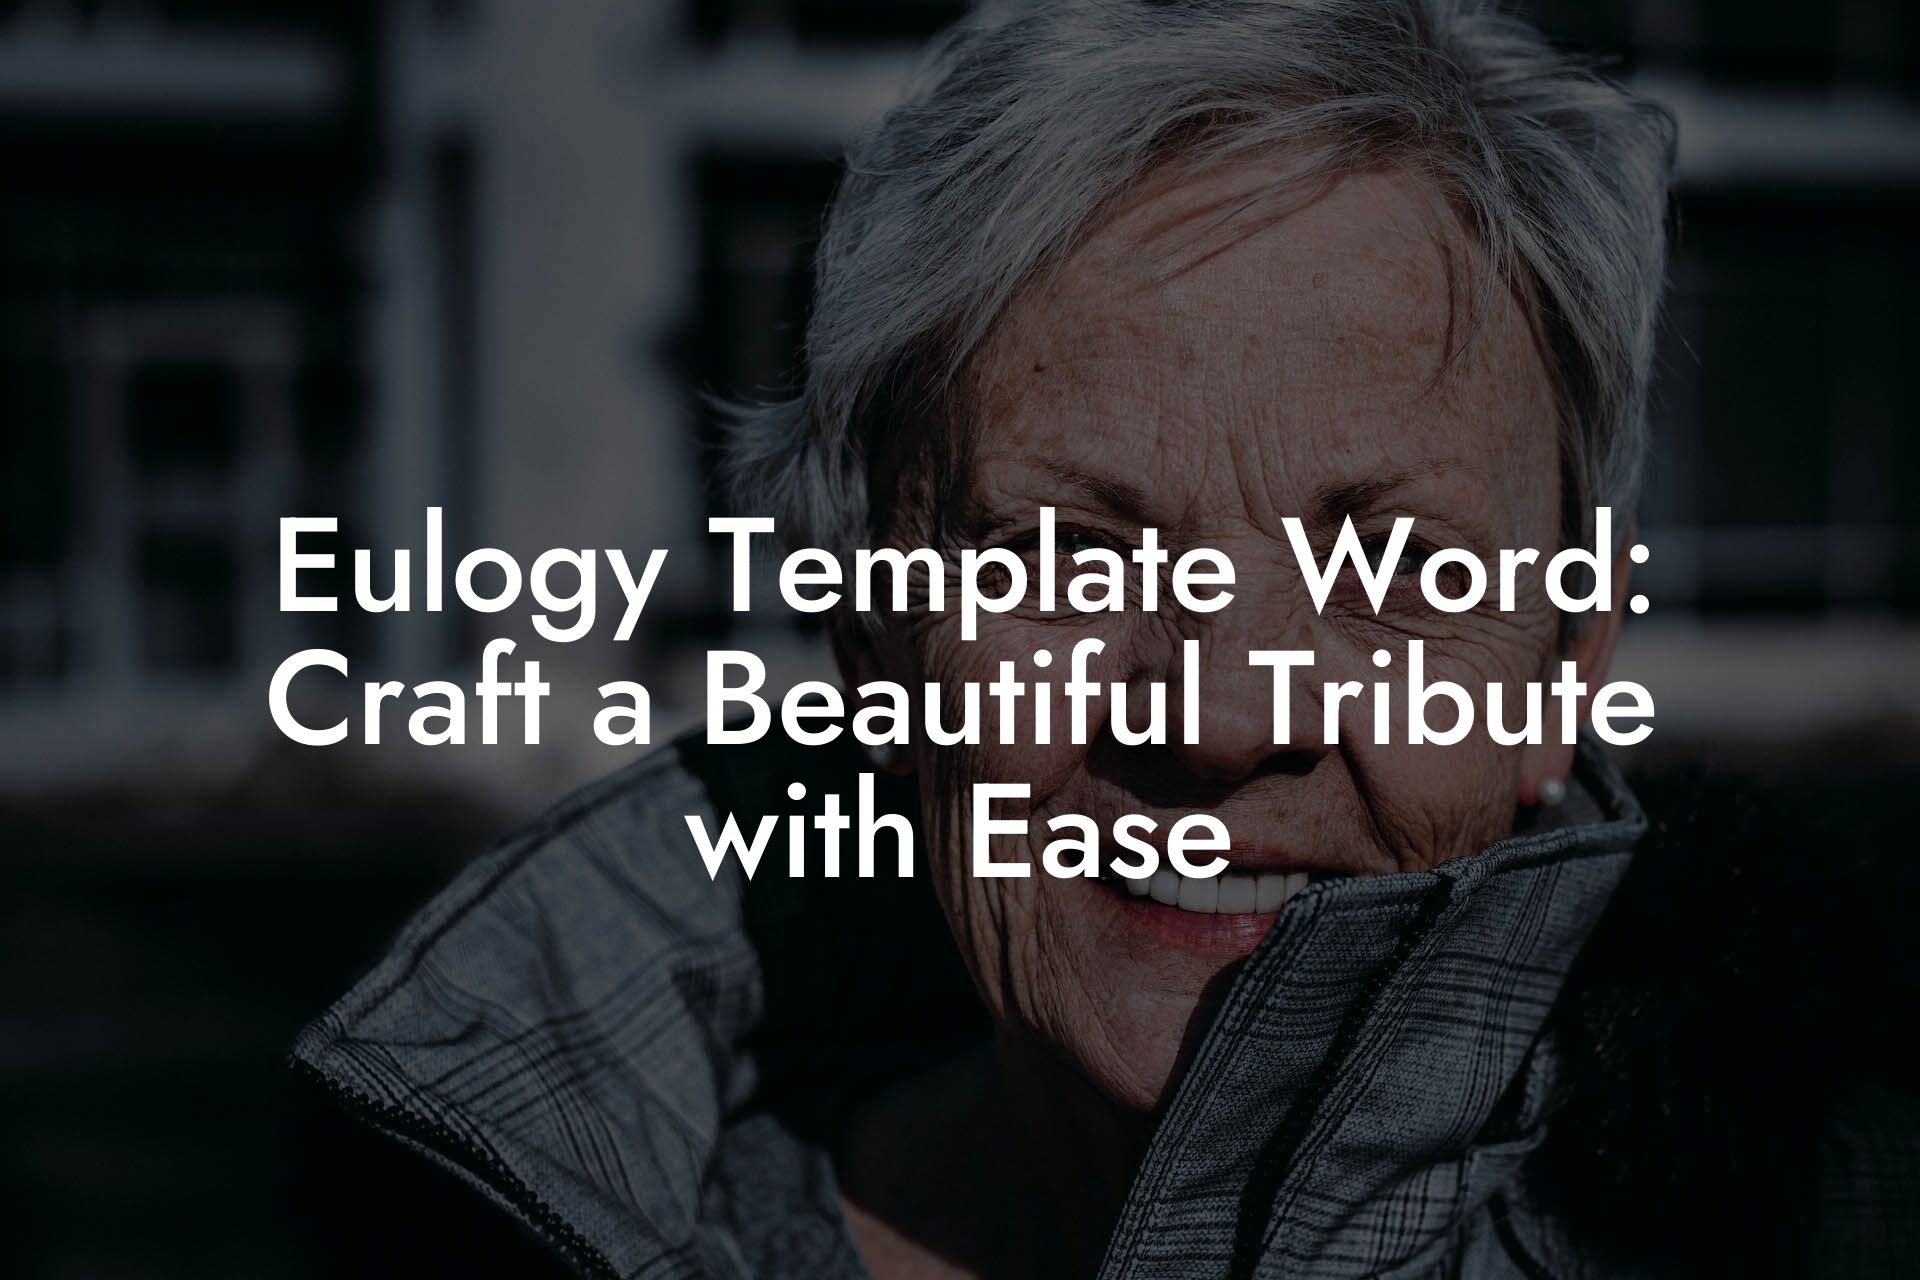 Eulogy Template Word: Craft a Beautiful Tribute with Ease